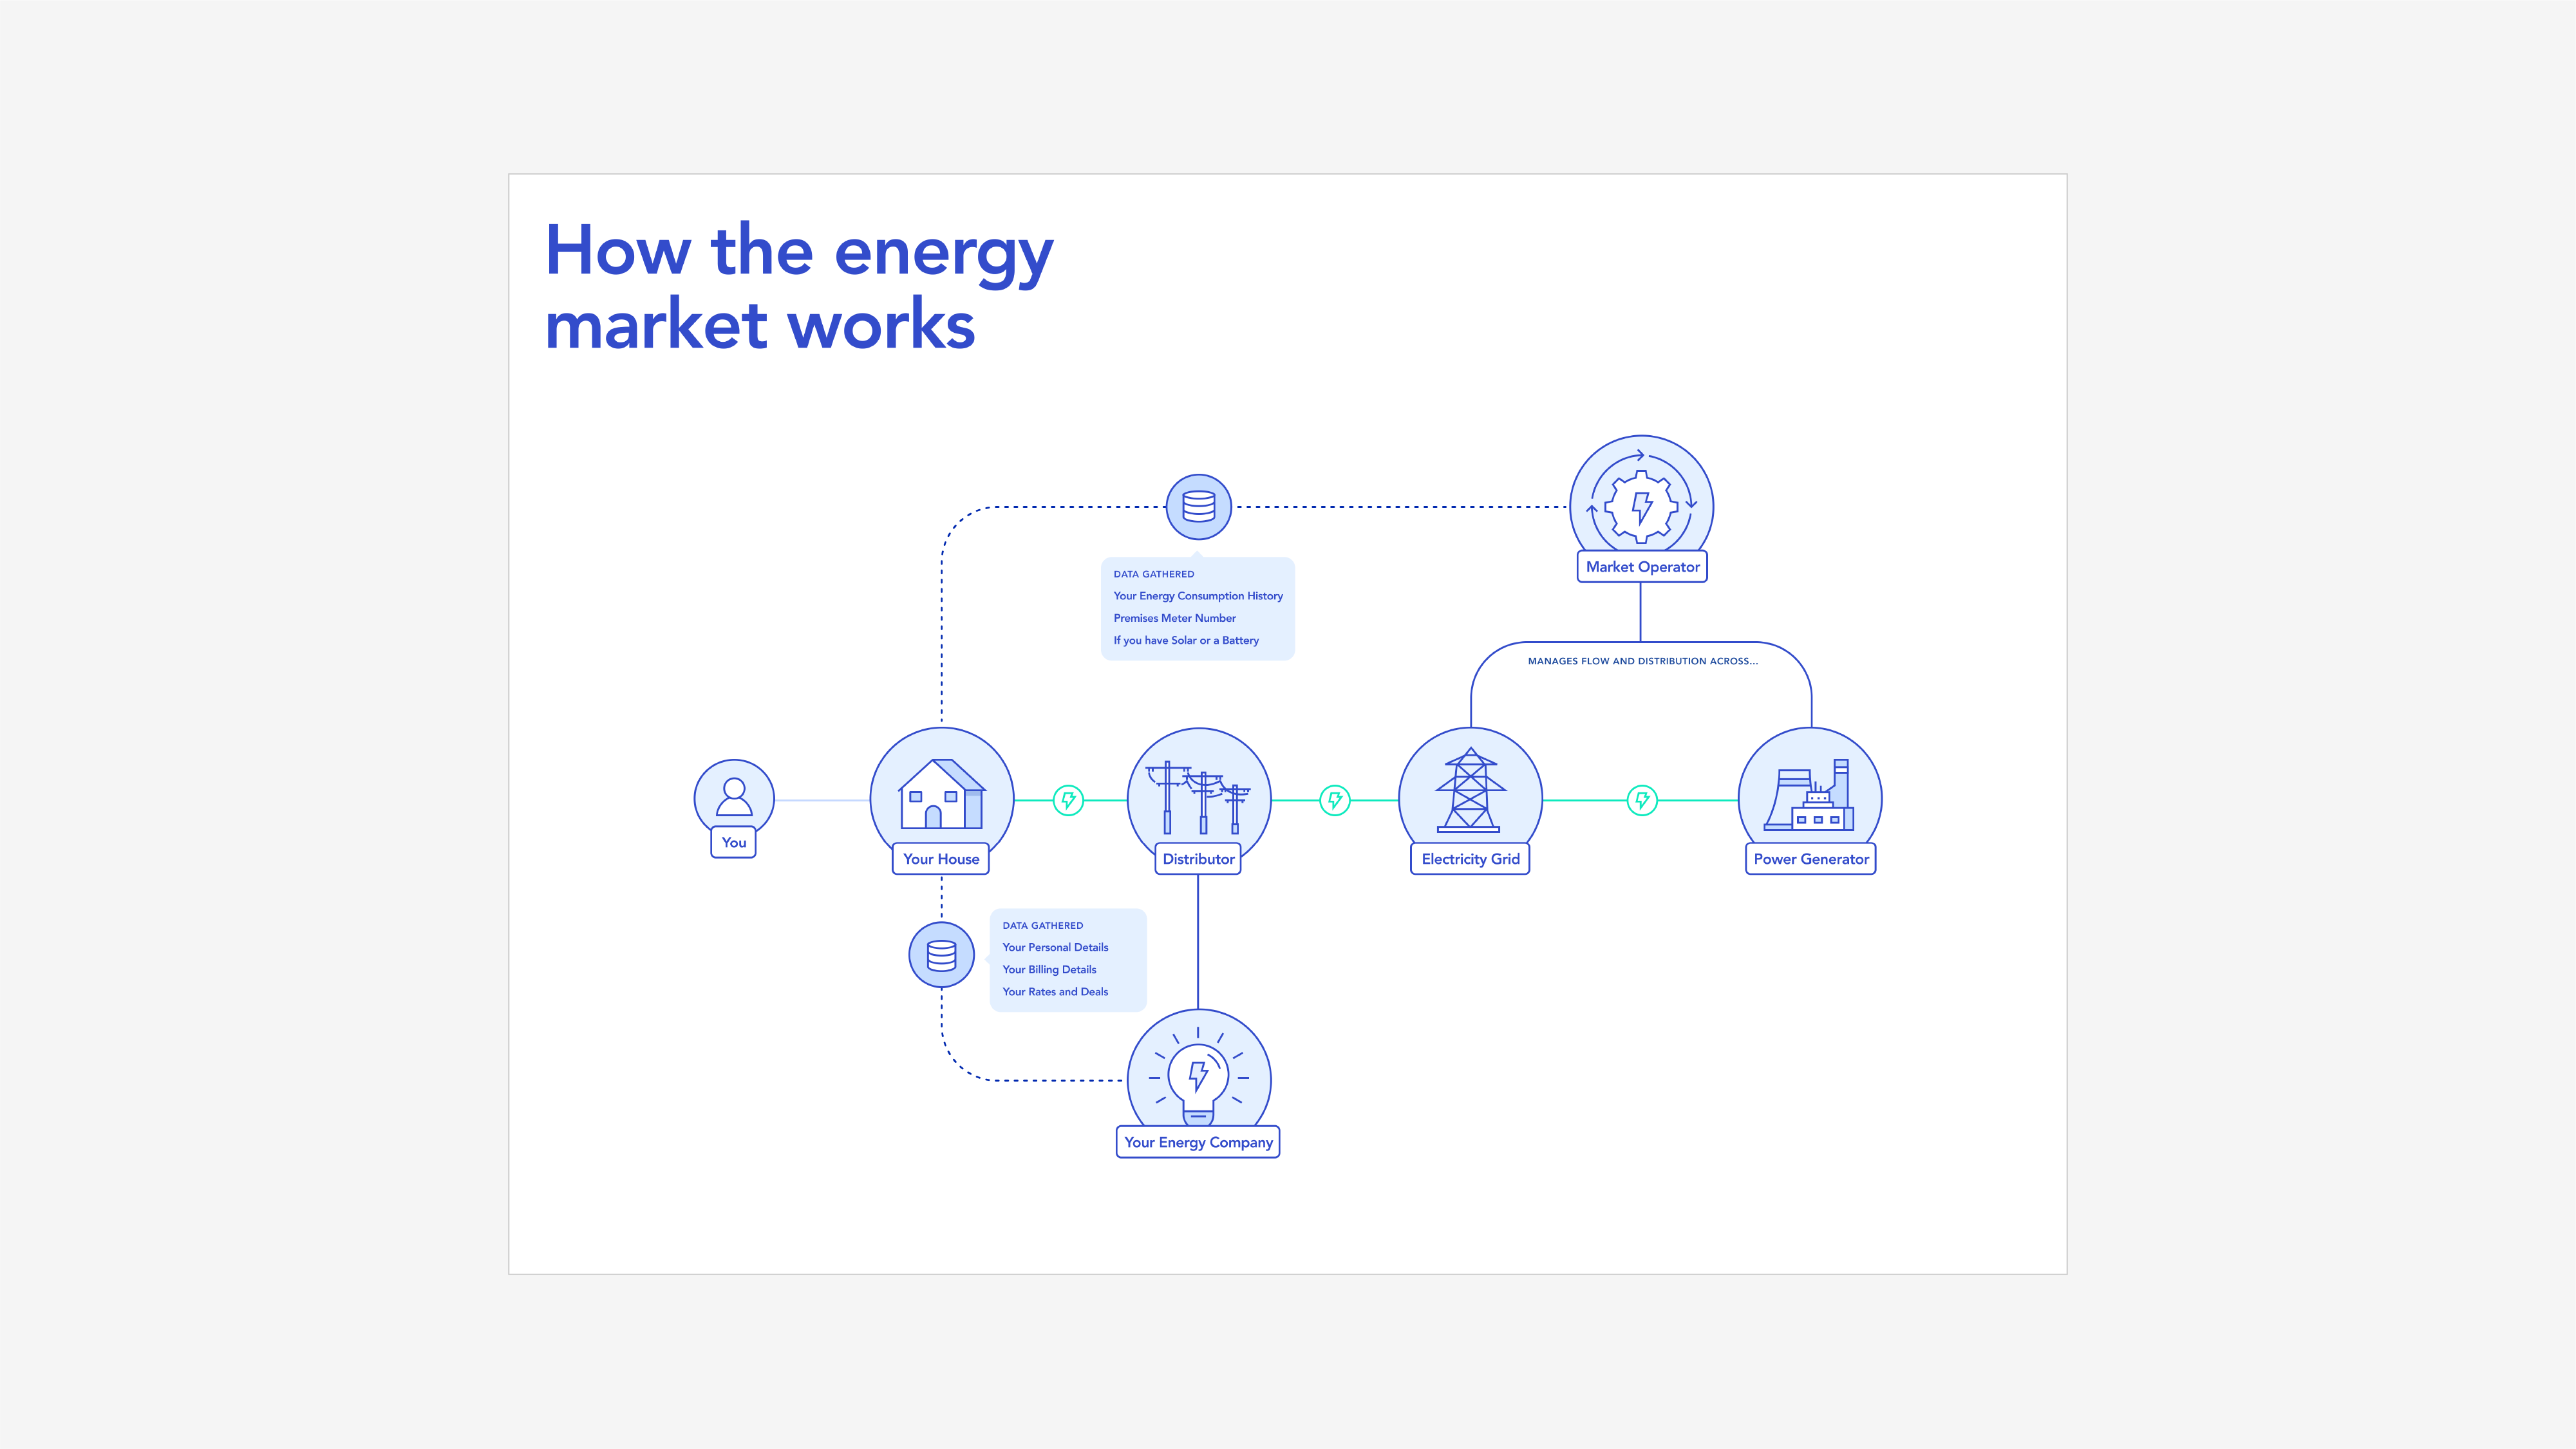 A simplified diagram showing how the energy market works in in Australia. This was an effective tool in helping people to understand the way the industry connects and works together.